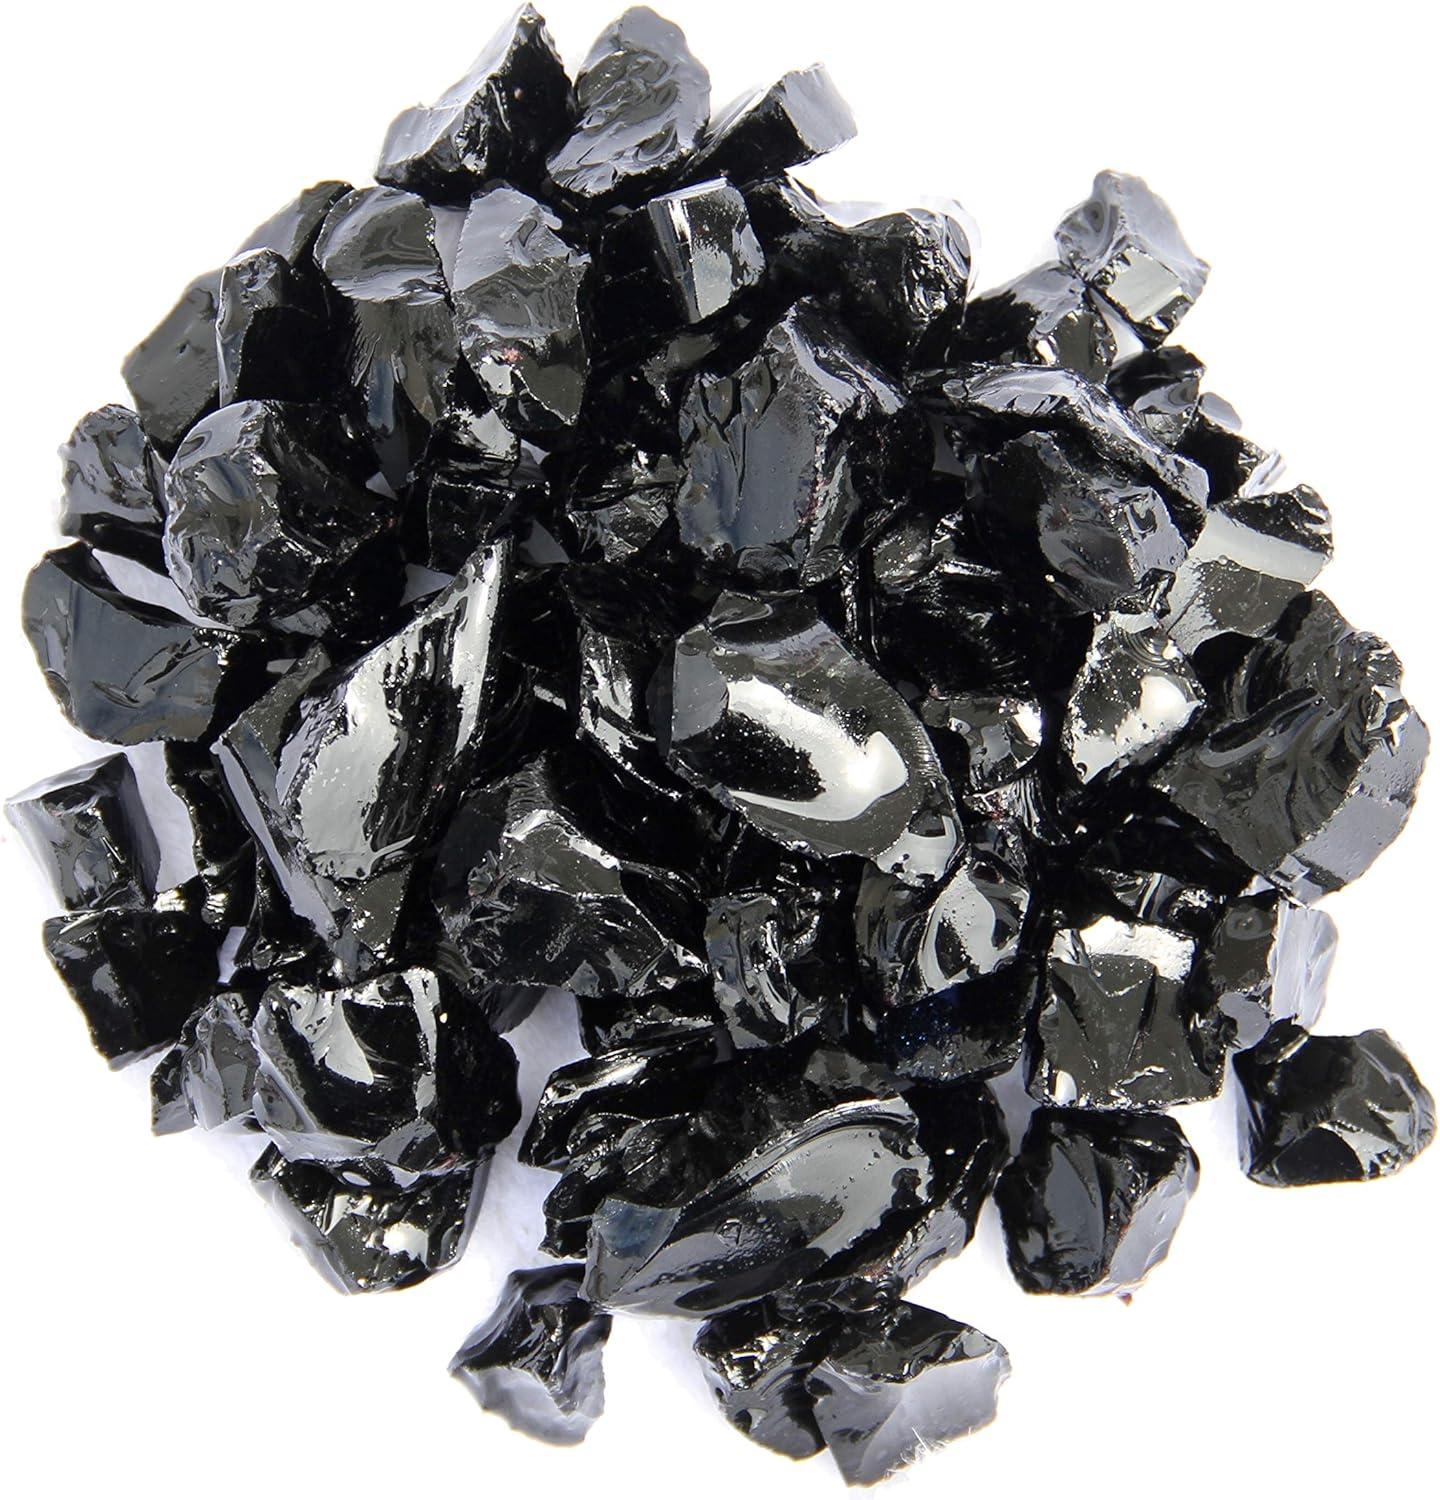 Modern Shimmering Black Recycled Fire Glass - 10 lbs